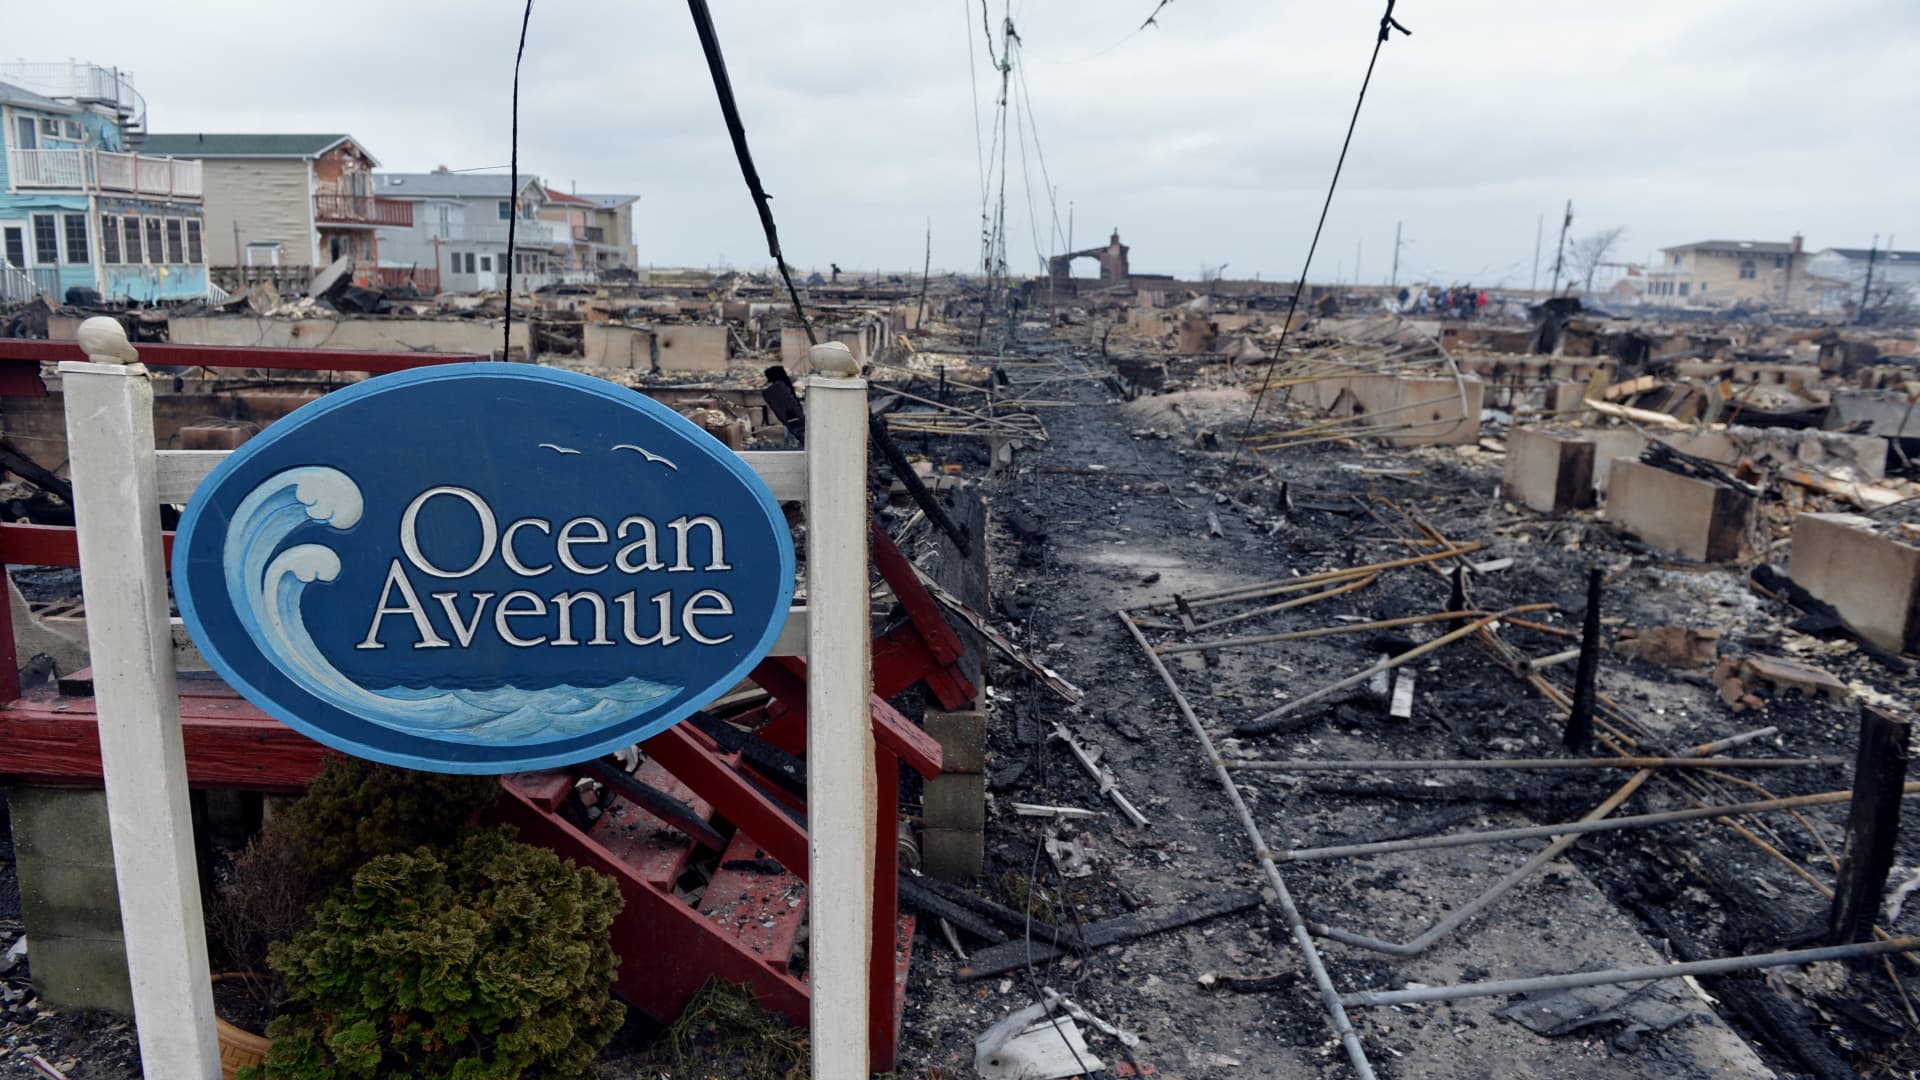 Damage is seen in the Breezy Point area of Queens in New York on October 30, 2012 after fire destroyed about 80 homes as a result of Hurricane Sandy which hit the area on October 29.